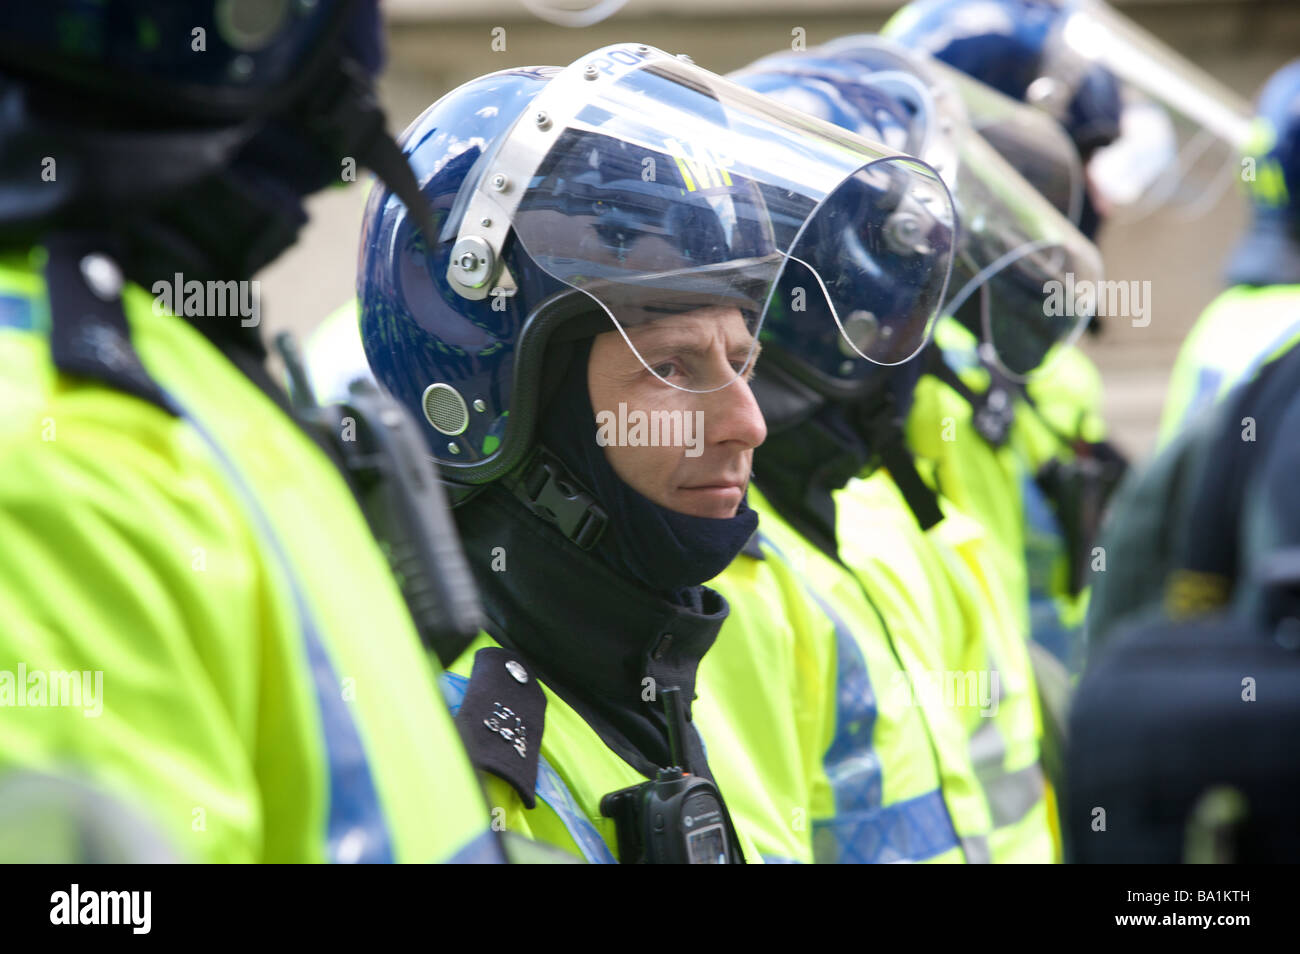 Police in riot gear G20 summit p    Line of police in riot gear at G20 summit protest, London Stock Photo